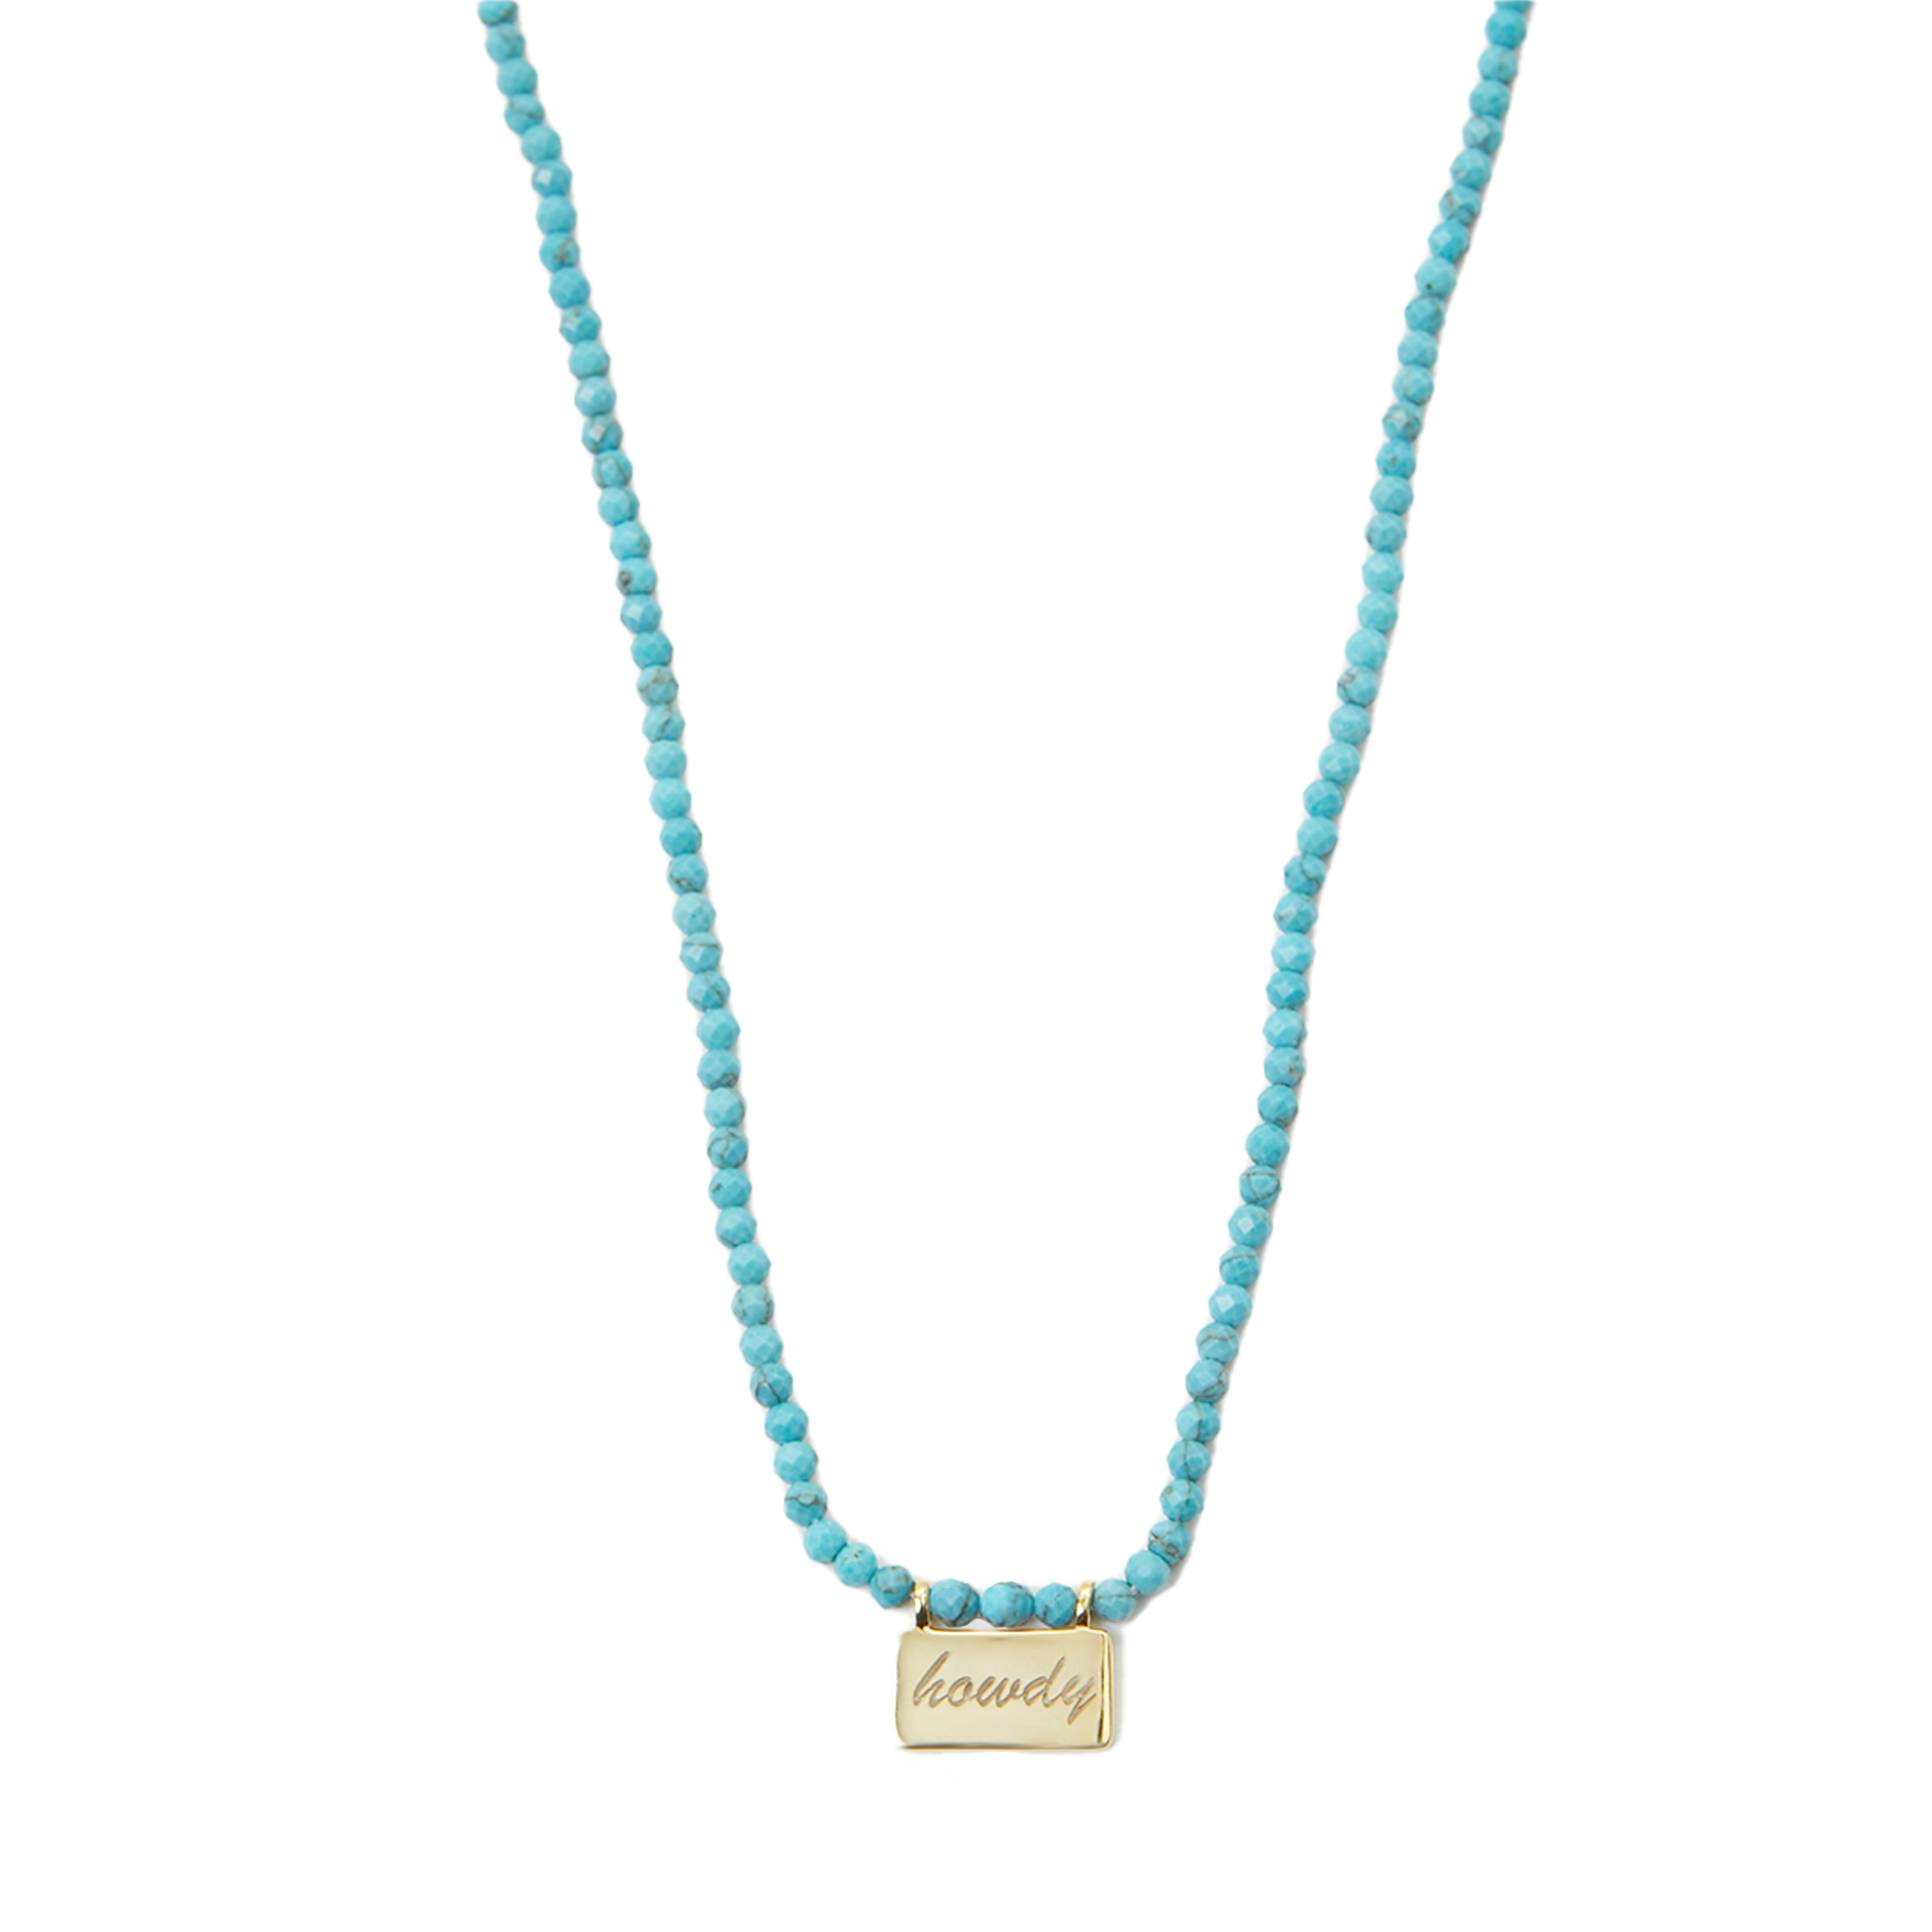 THE TURQUOISE HOWDY NECKLACE